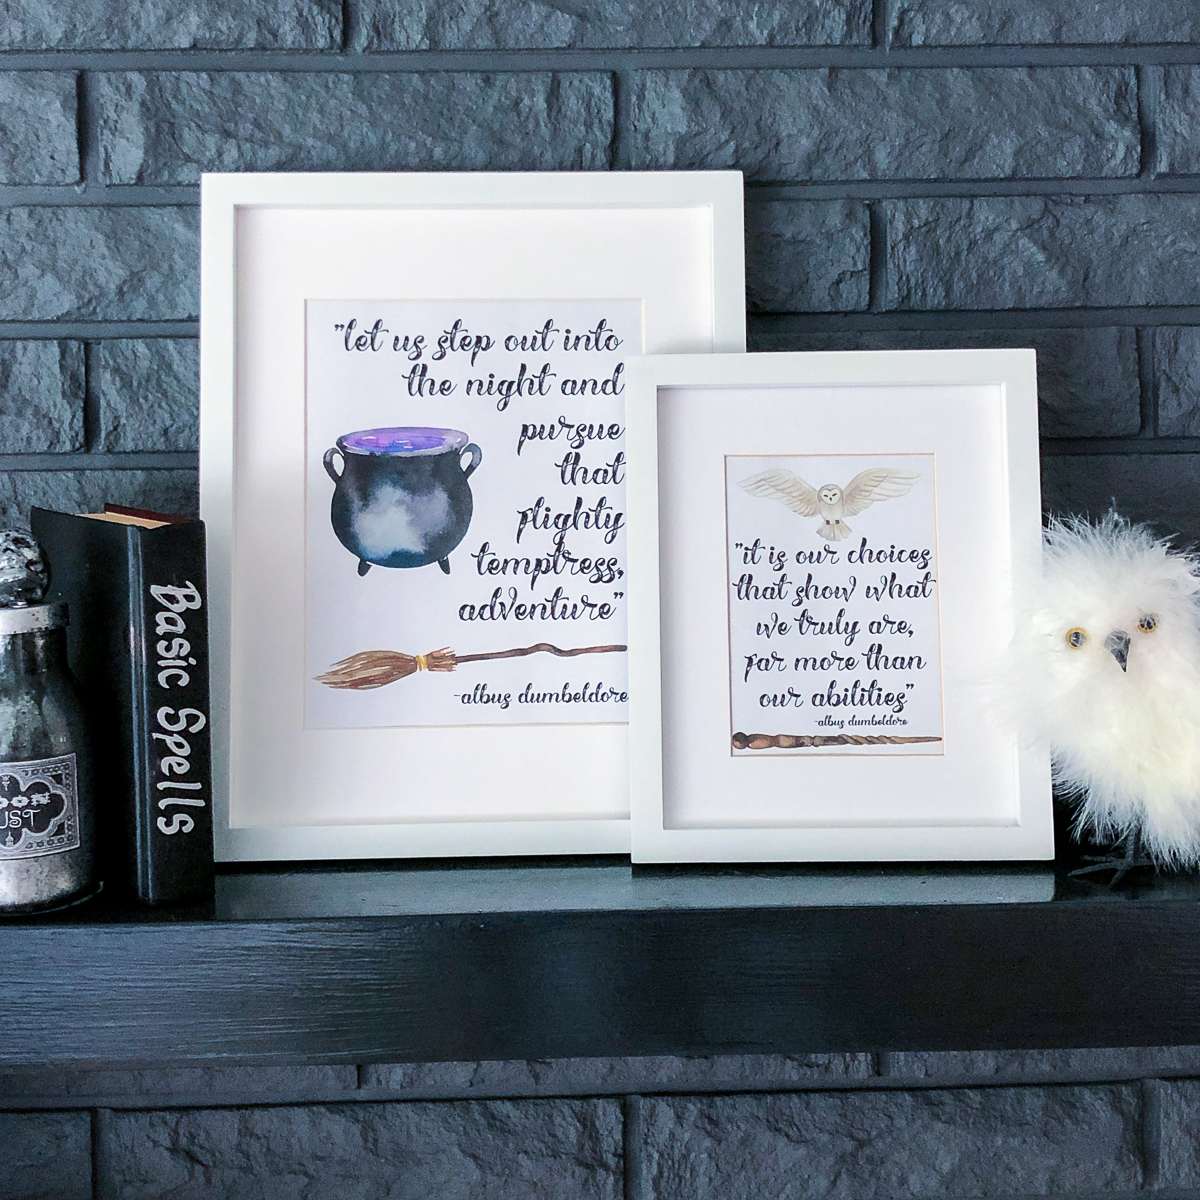 The Harry Potter quotes printed and framed.